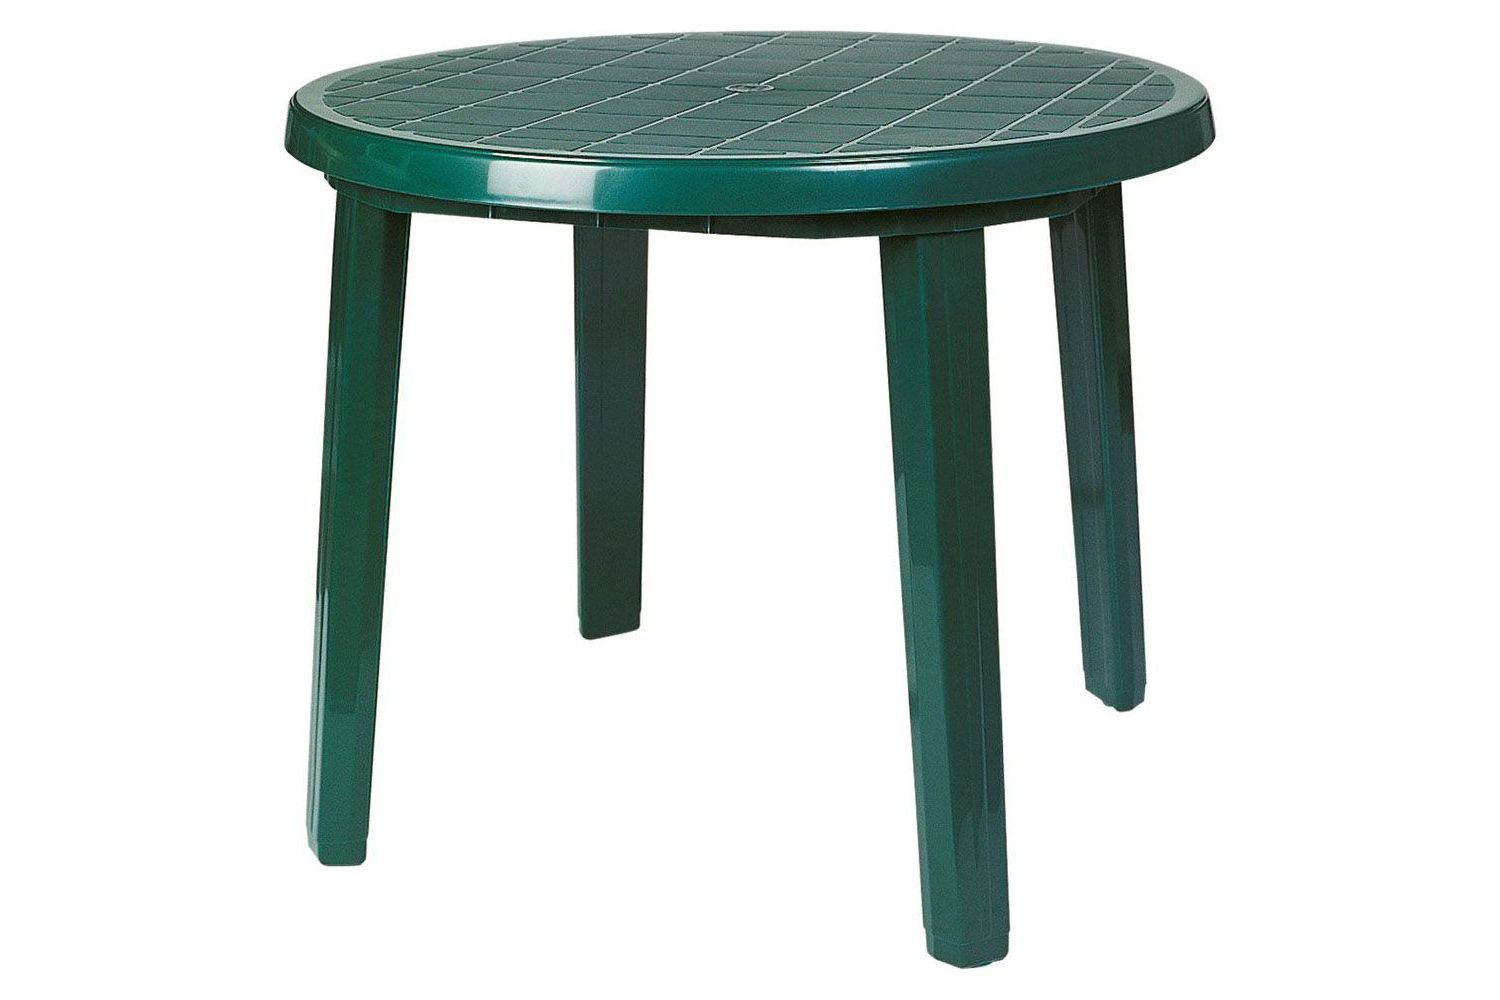 Ronda 36\" Round Dining Table Isp125 Pertaining To Preferred Menifee 36'' Dining Tables (View 18 of 20)